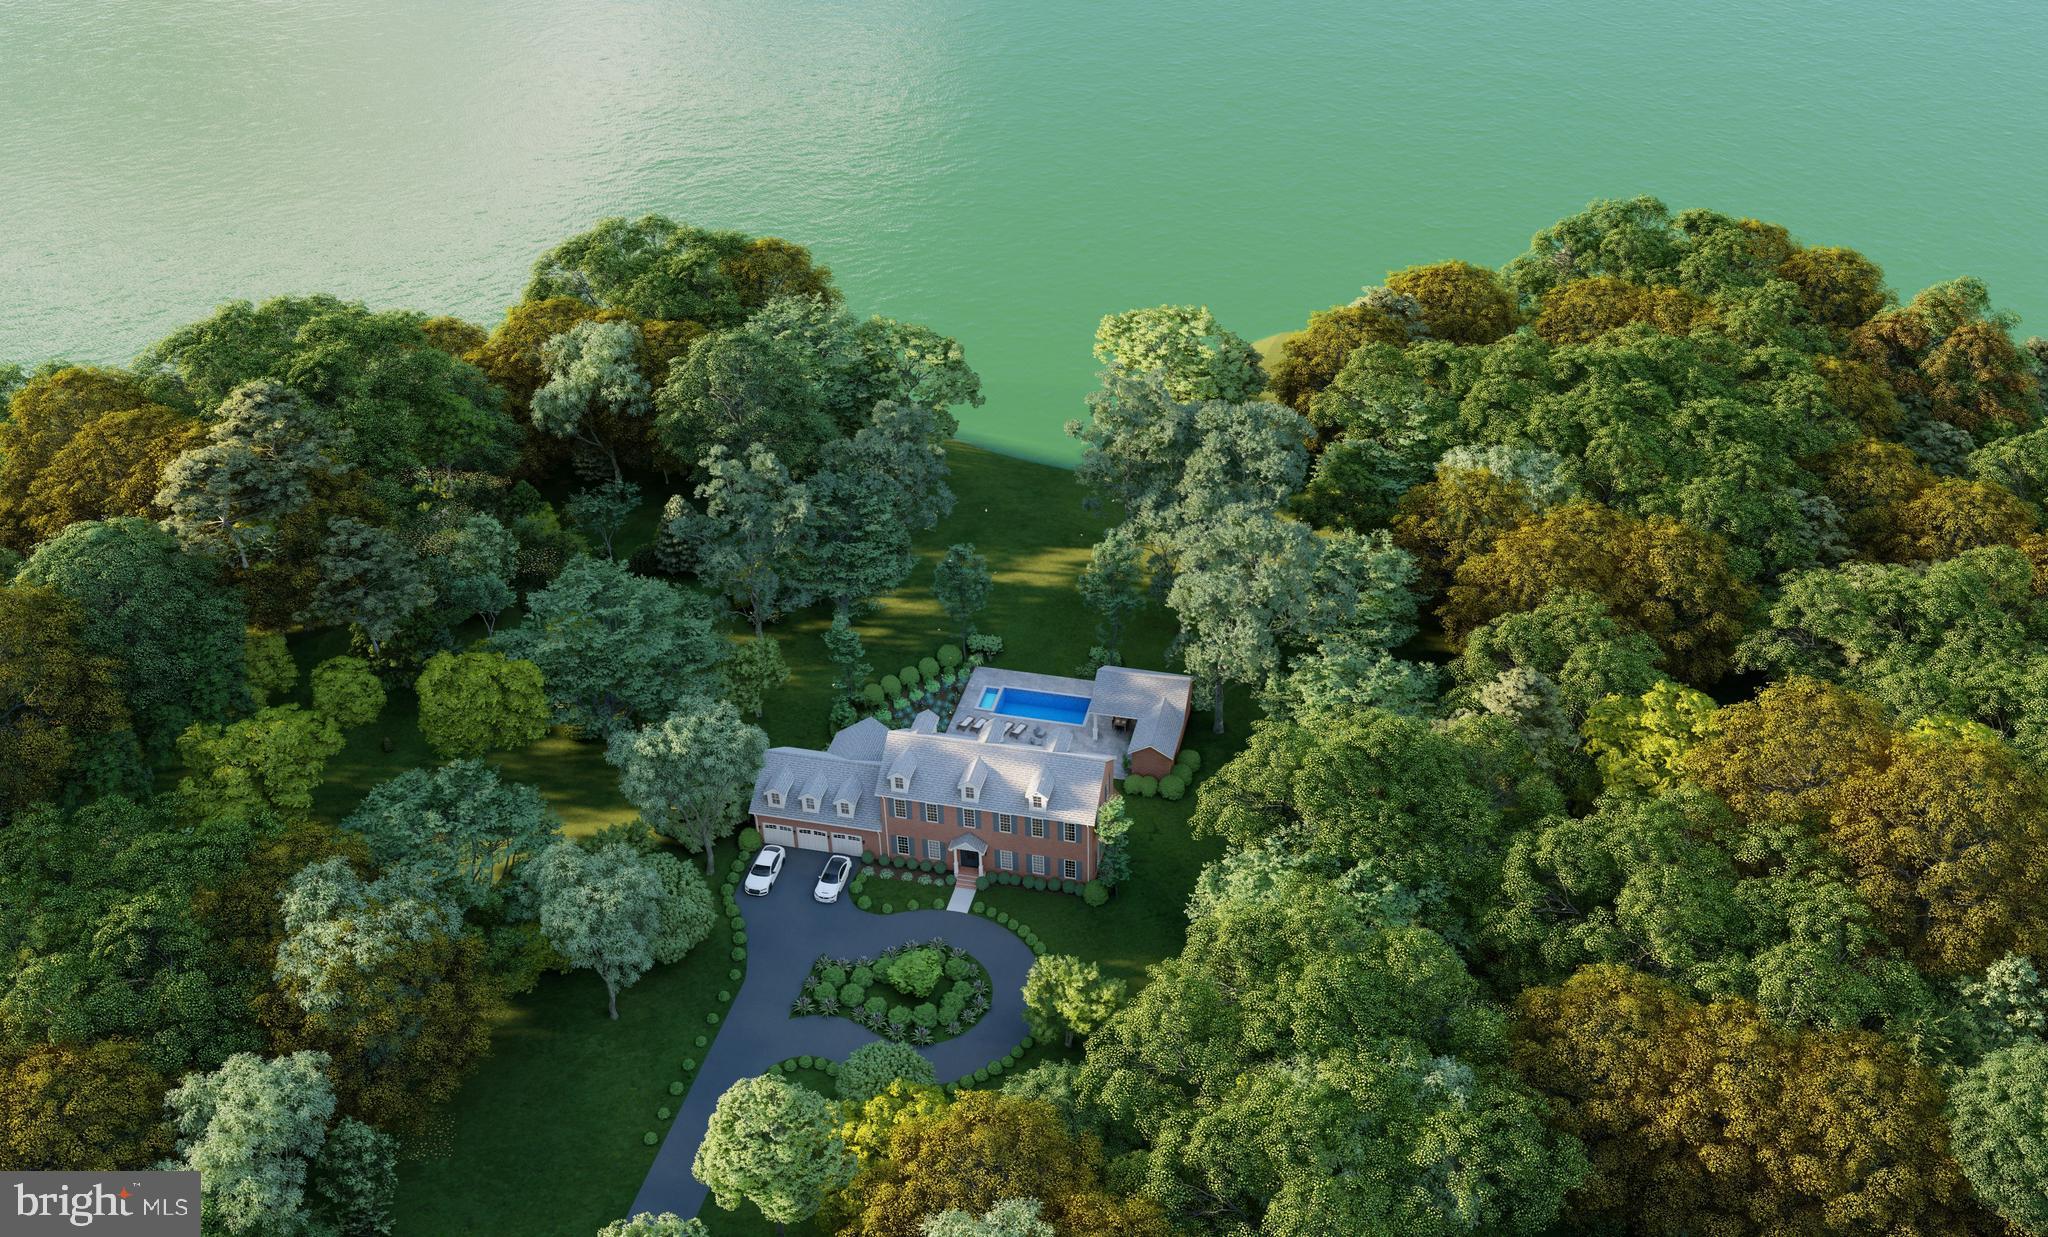 an aerial view of a house with outdoor space and trees all around